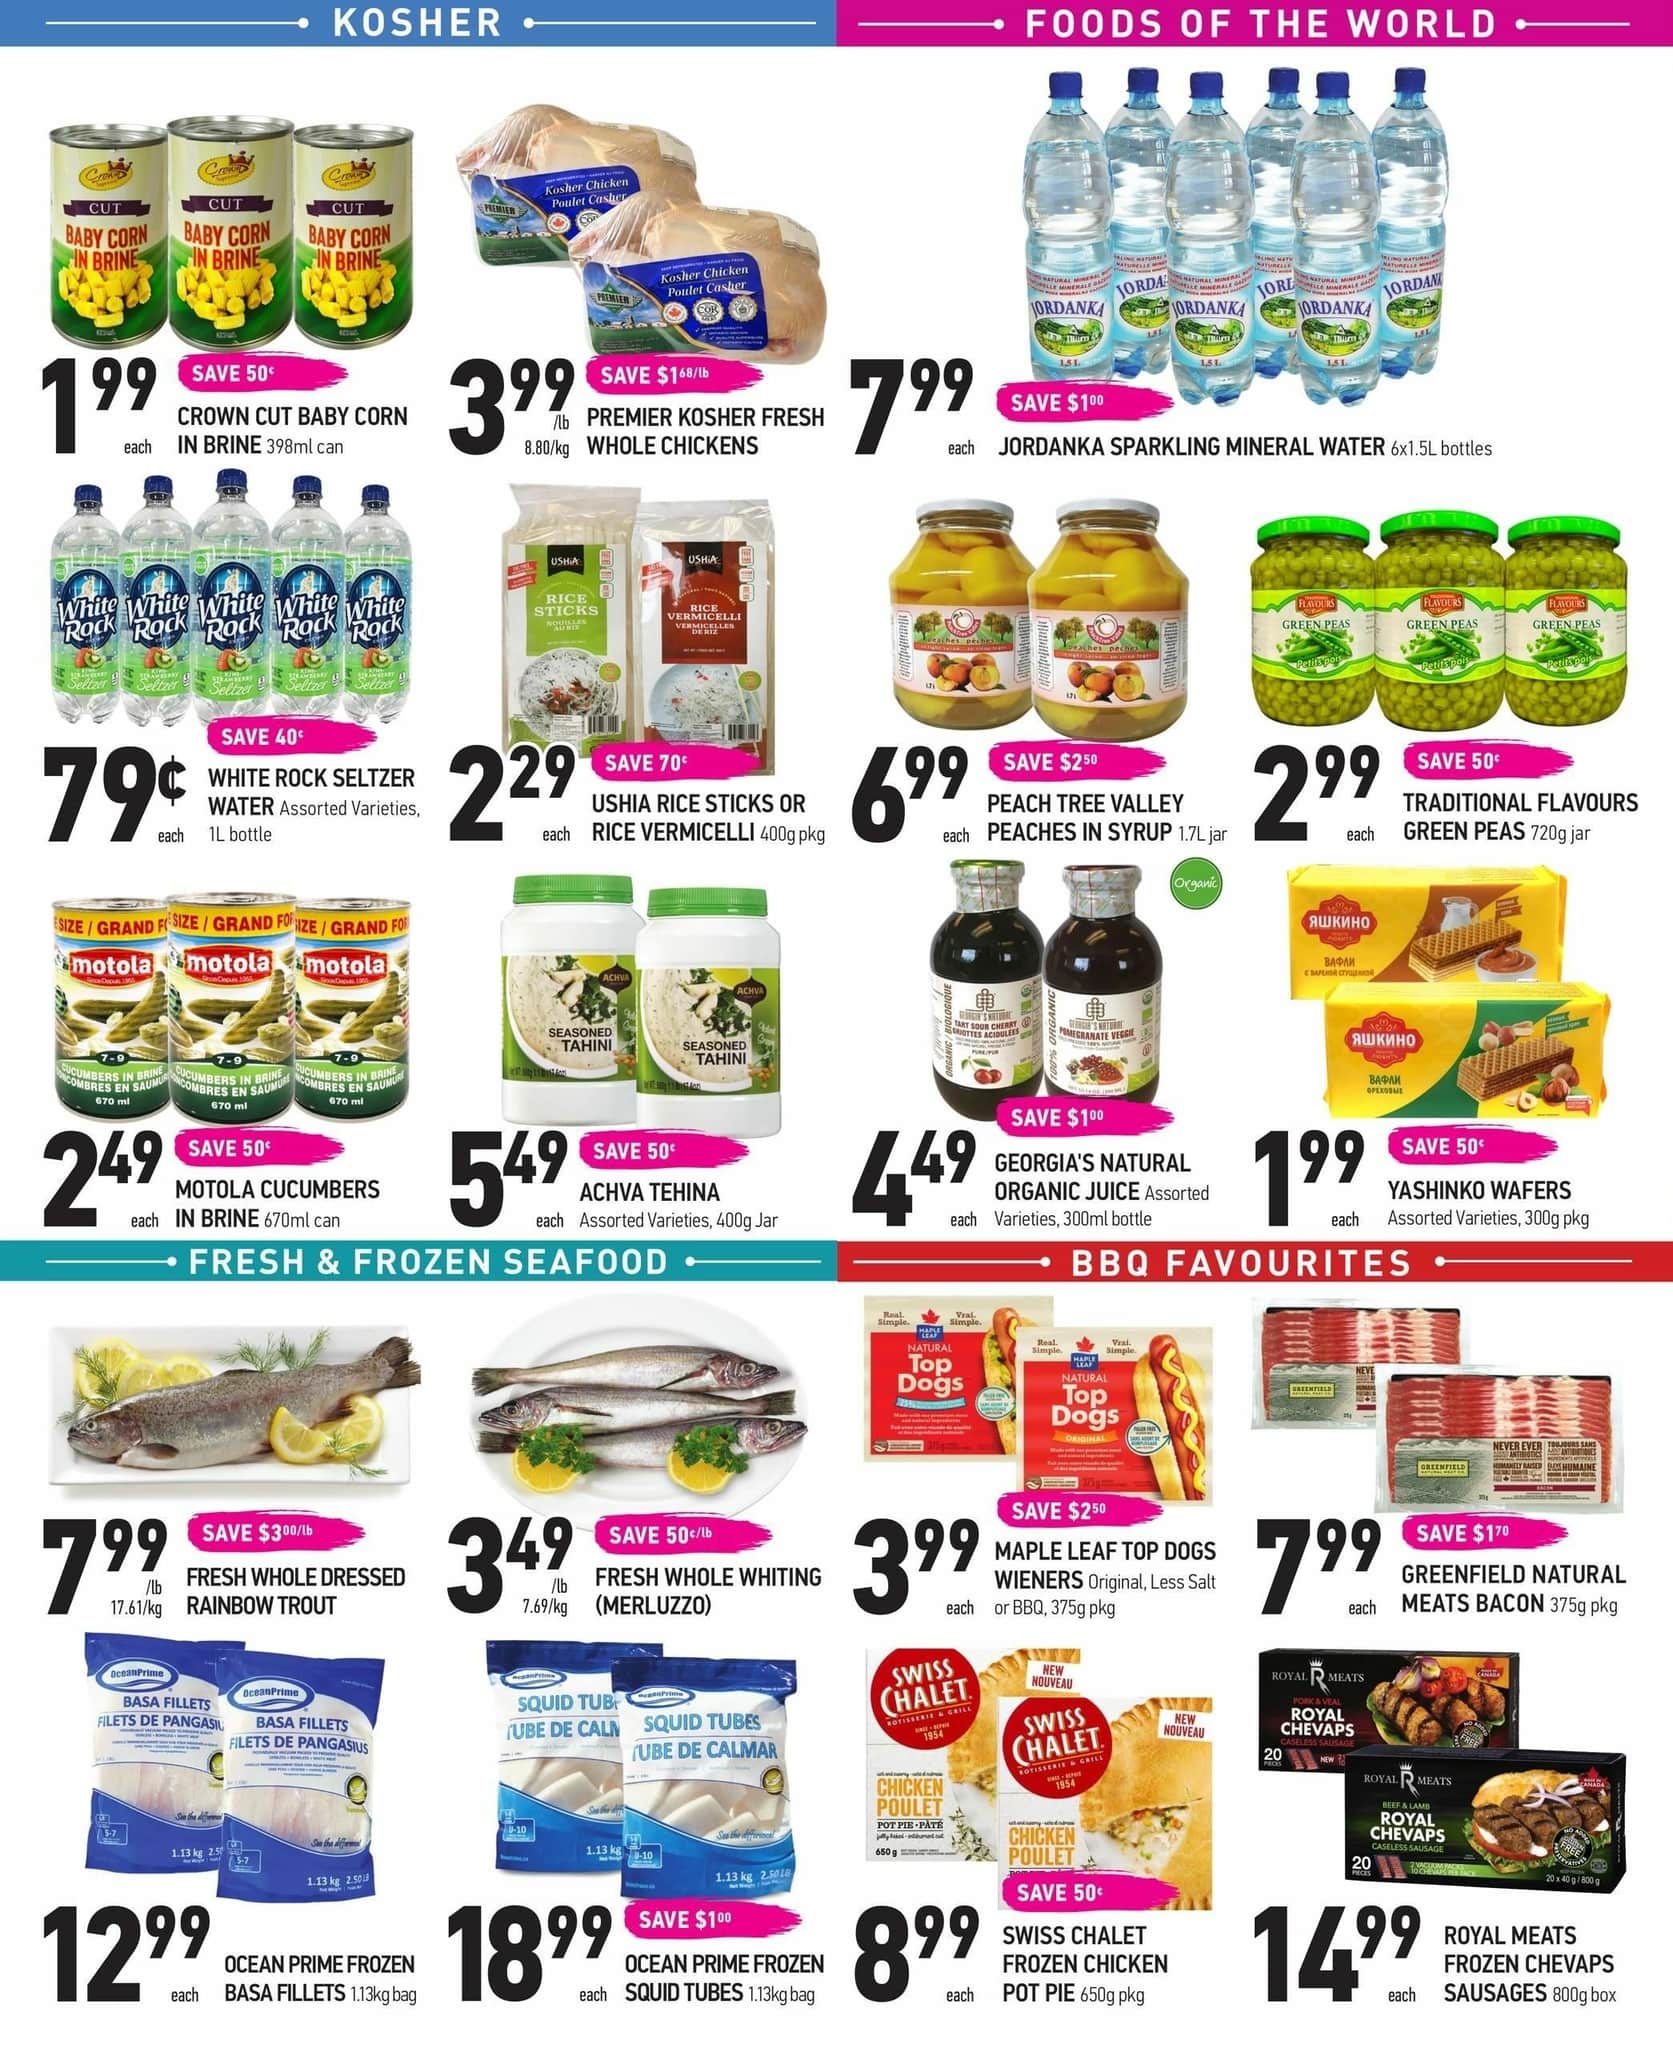 Coppa's Fresh Market - Weekly Flyer Specials - Page 4